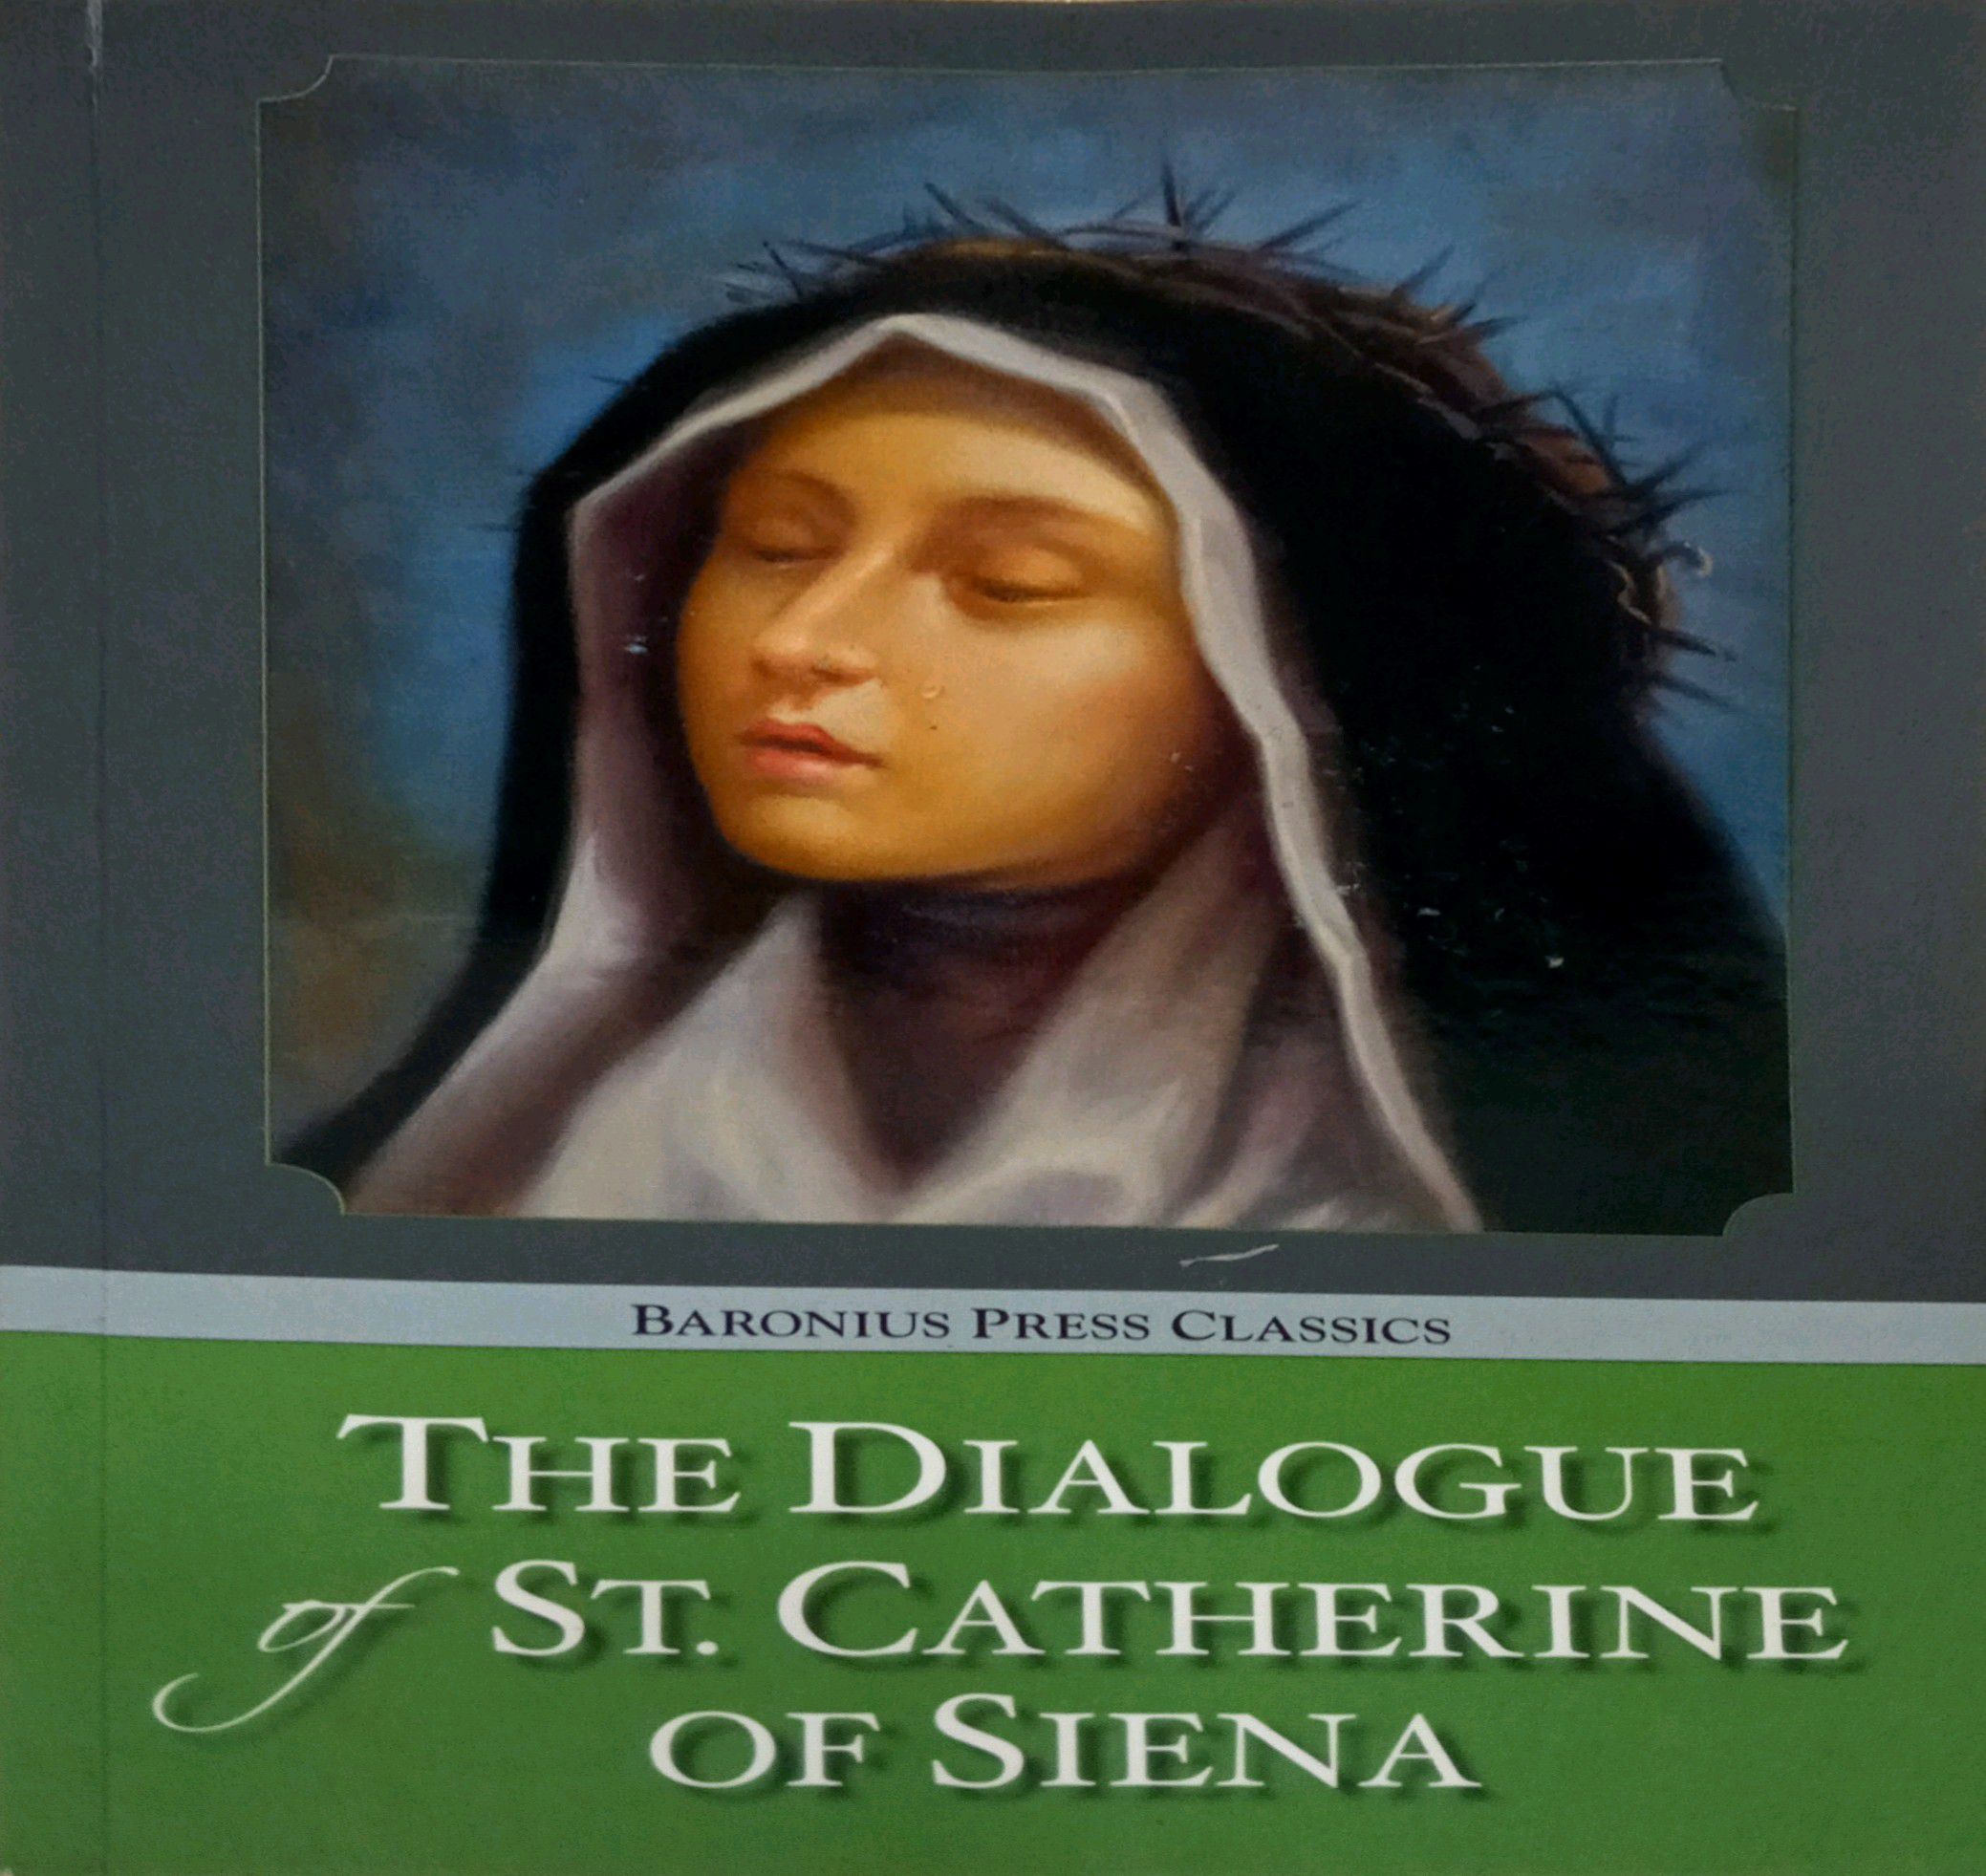 THE DIALOGUE OF ST. CATHERINE OF SIENA